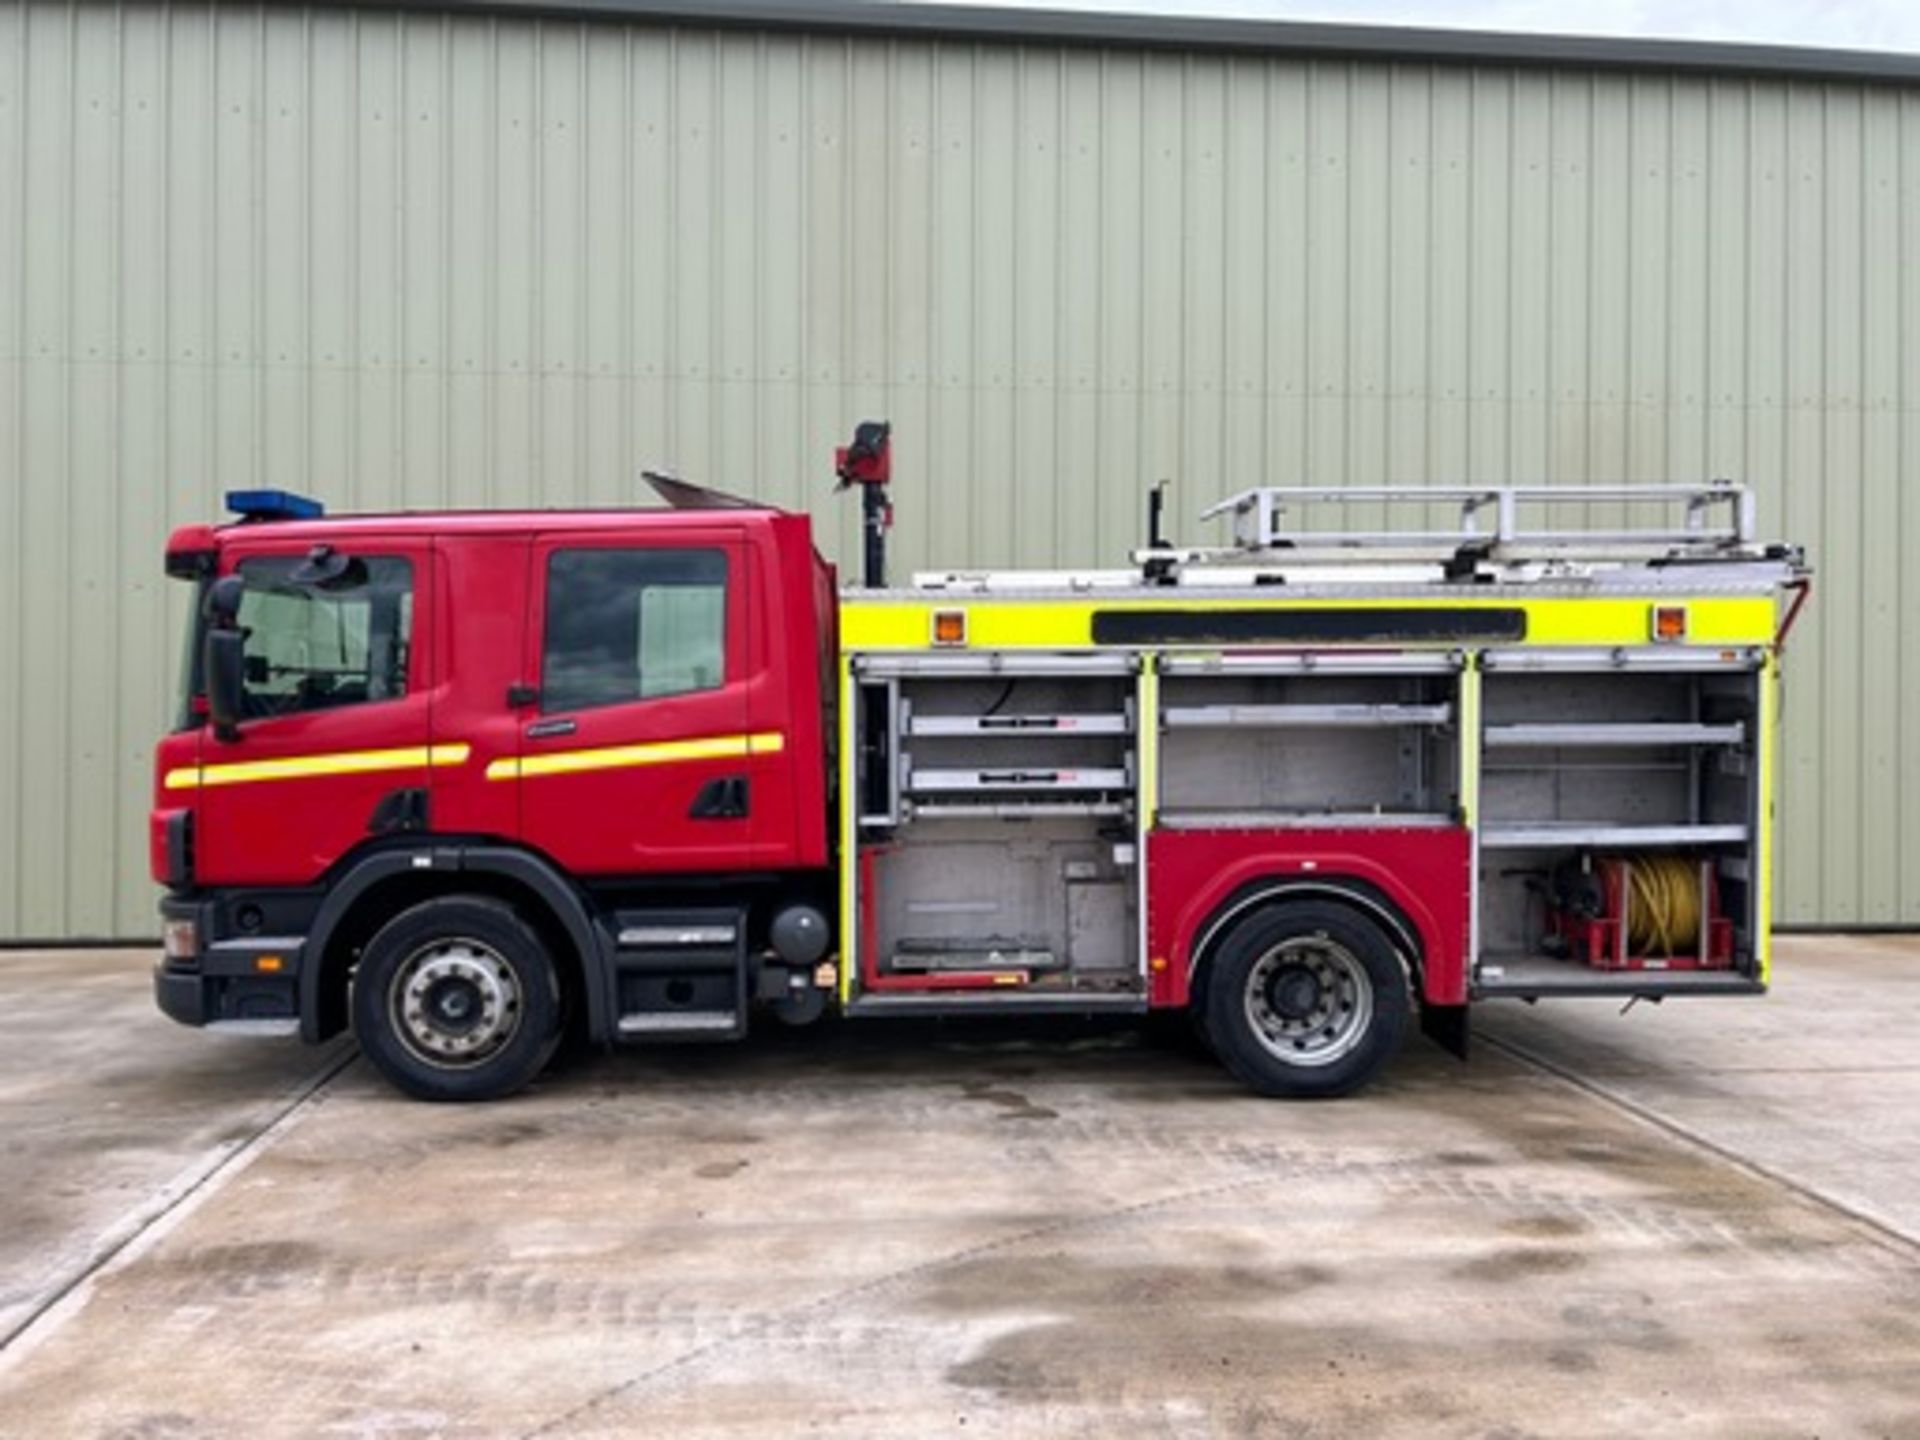 Scania Excalibur 94D 260 Fire Appliance - Image 8 of 26